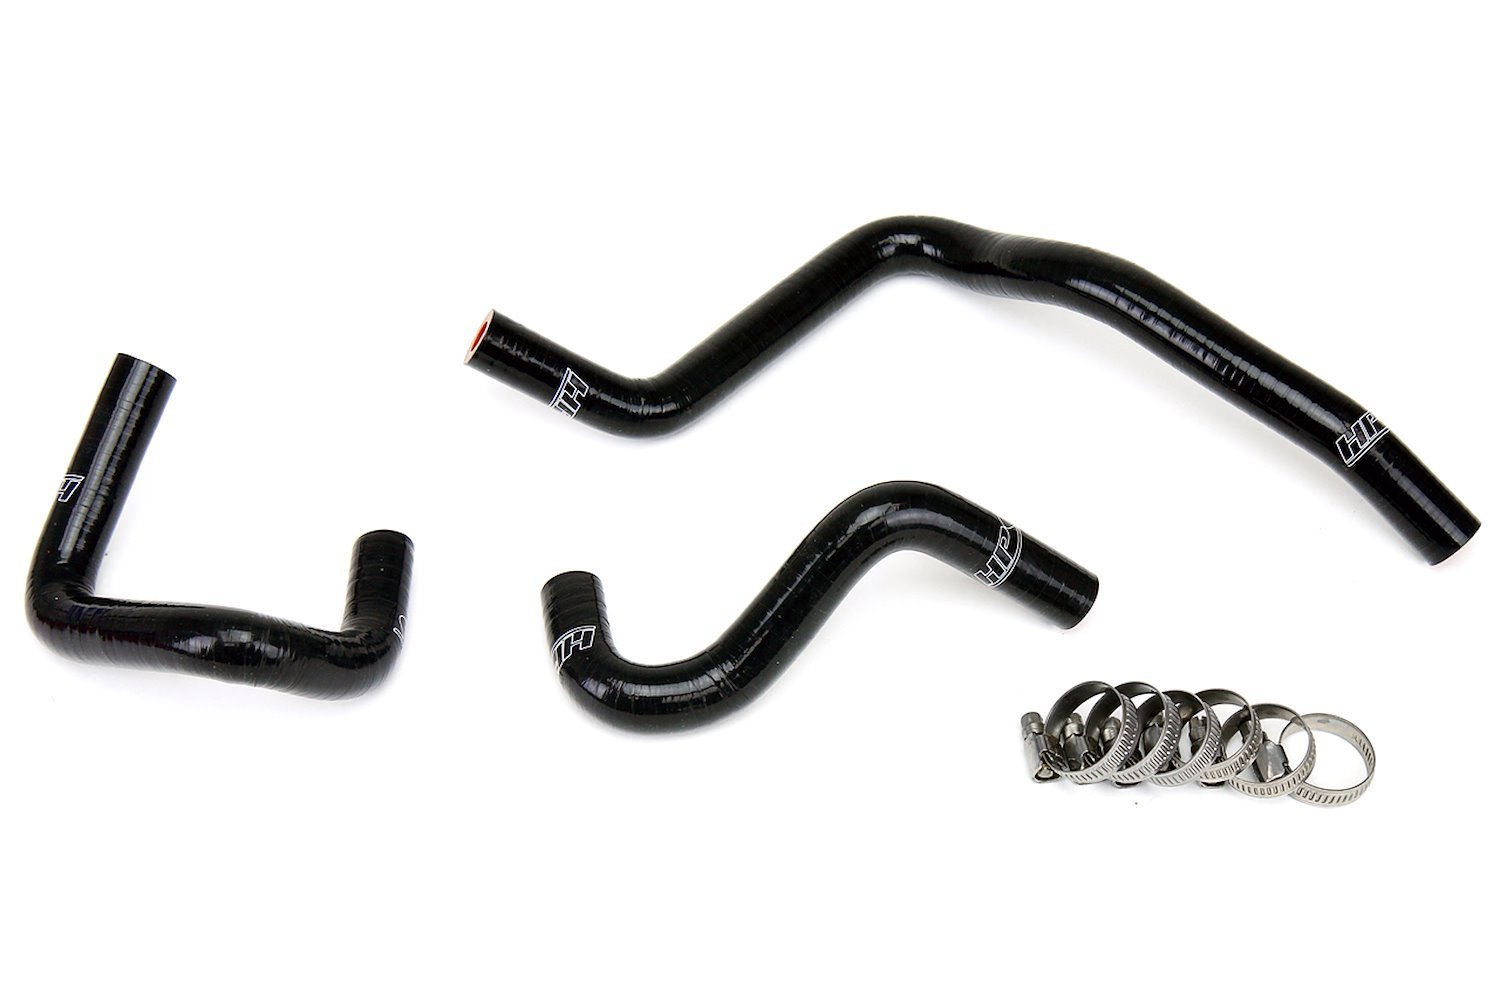 57-1748-BLK Coolant Hose Kit, High Tem 3-Ply Reinforced Silicone, Replace OEM Rubber Ancillary Coolant Hoses